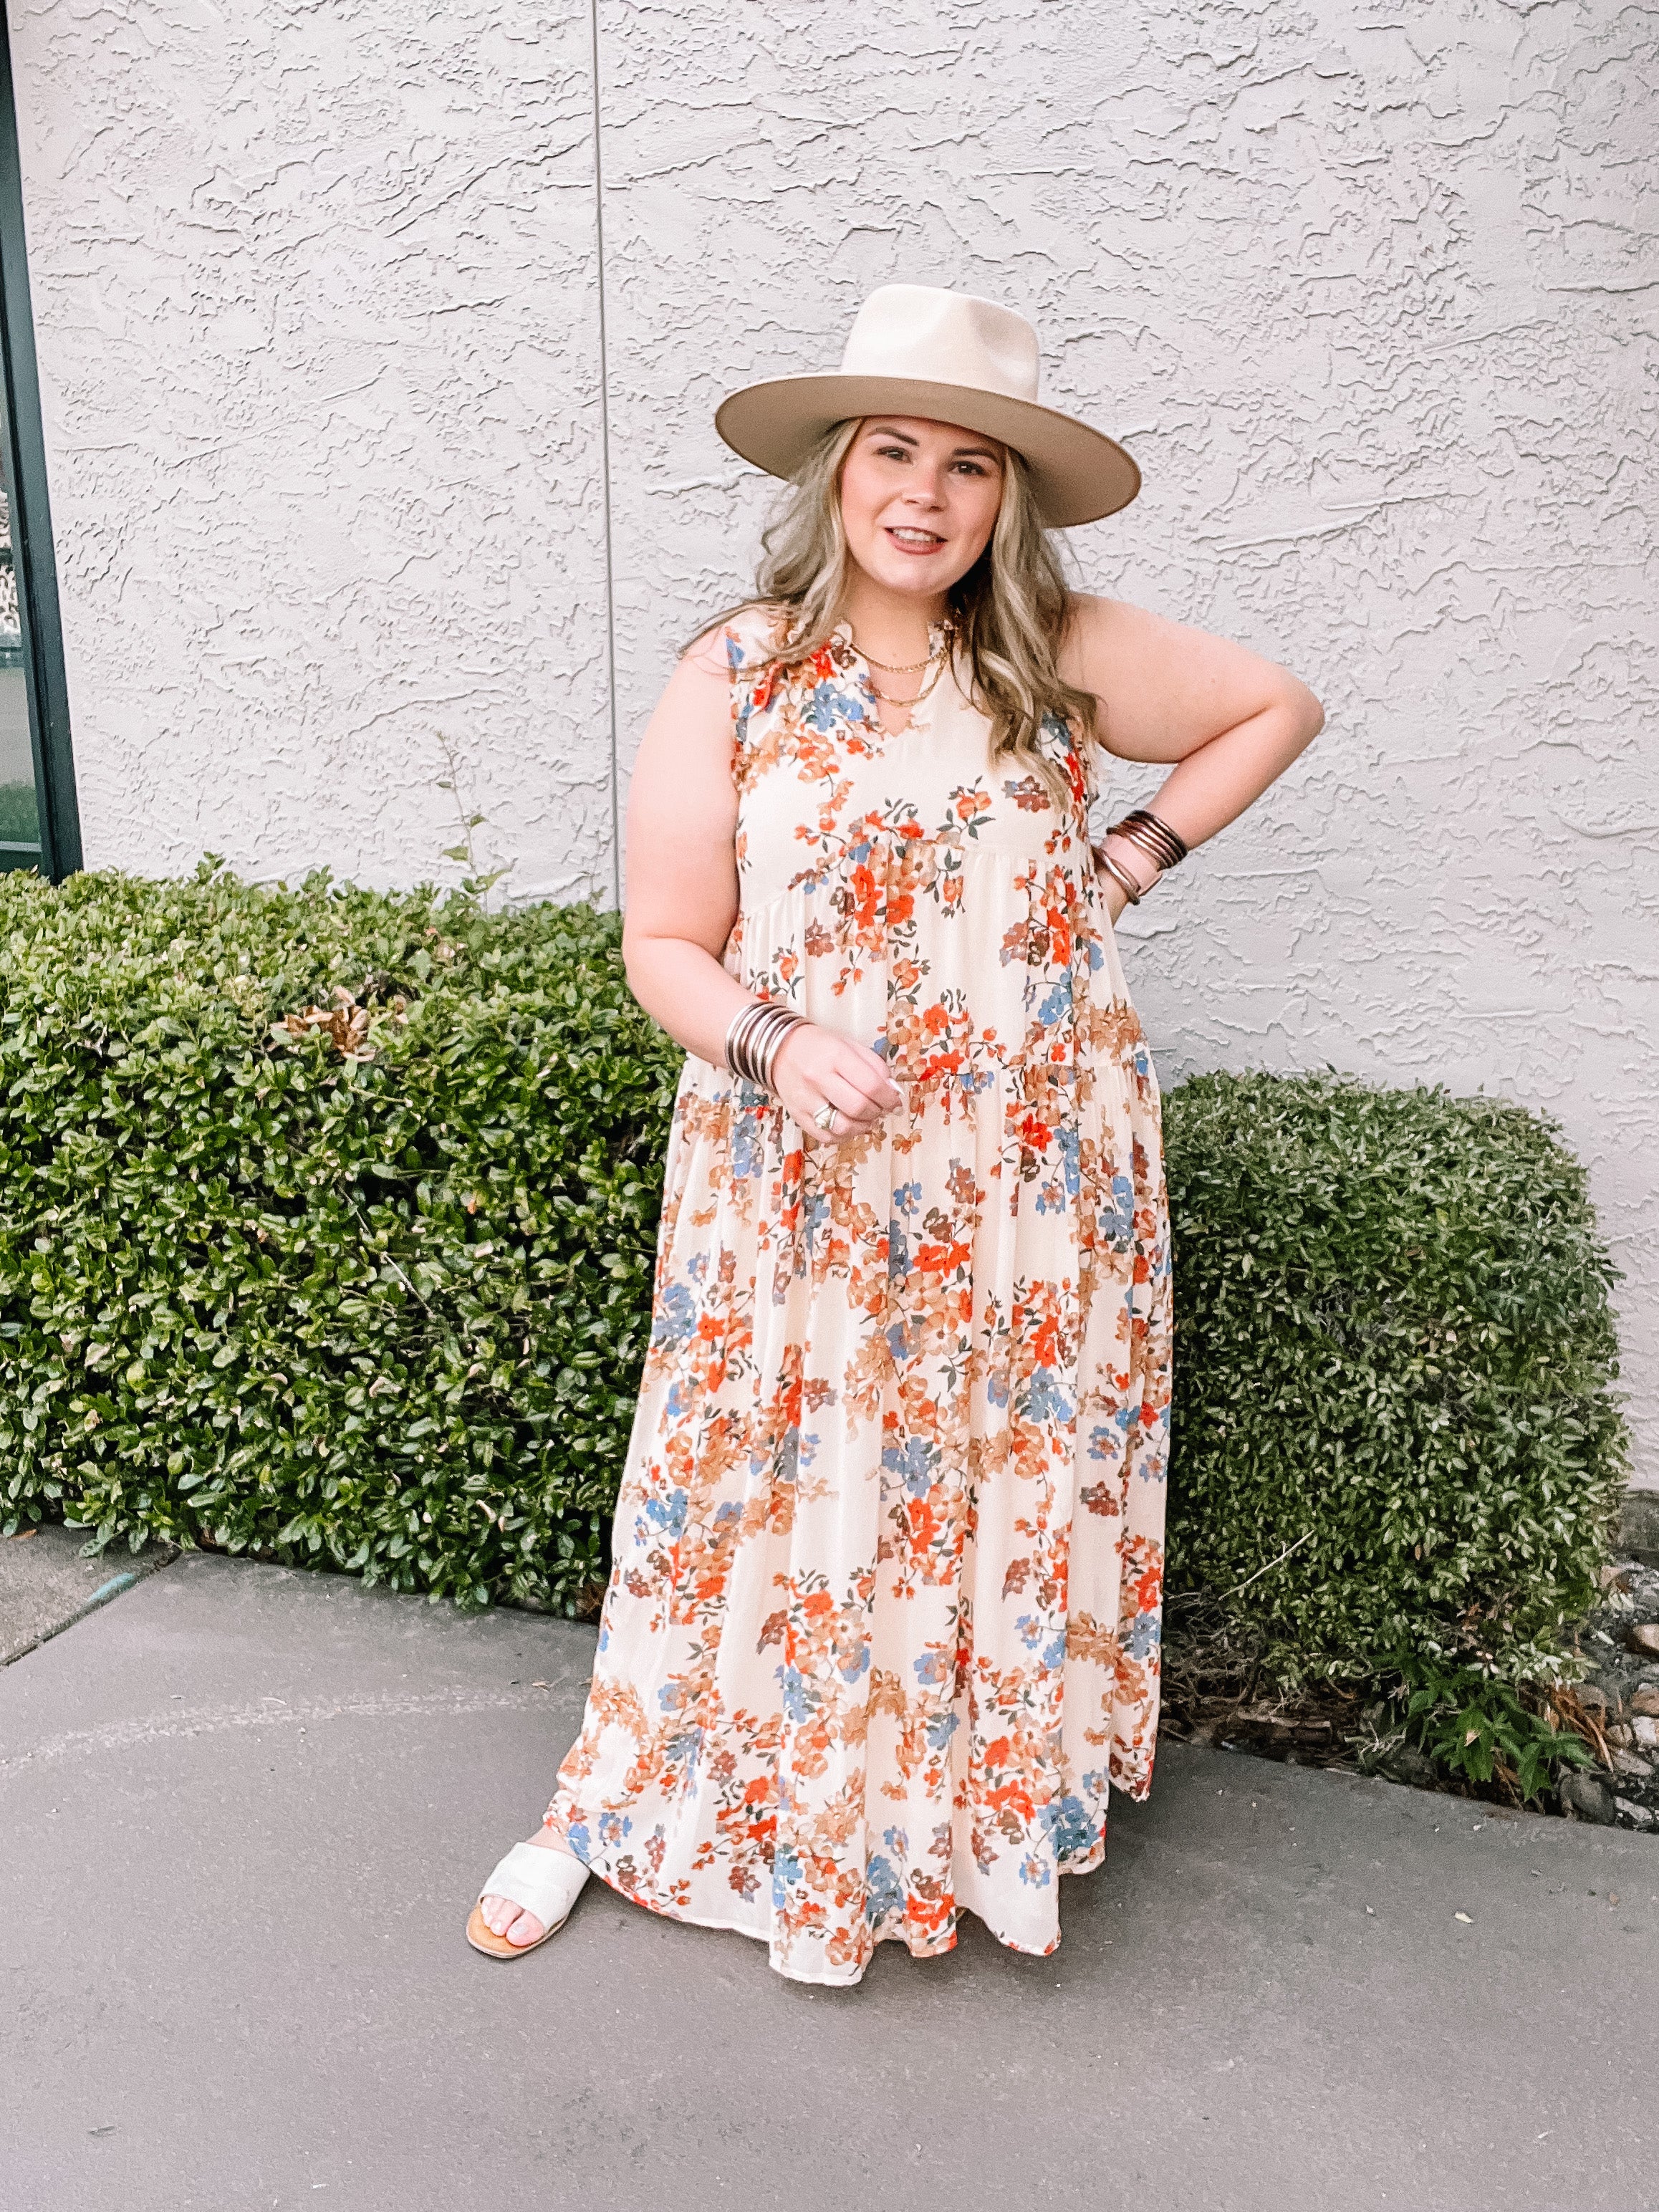 Sharing and Caring Notched Neck Tiered Floral Maxi Dress in Ivory - Giddy Up Glamour Boutique